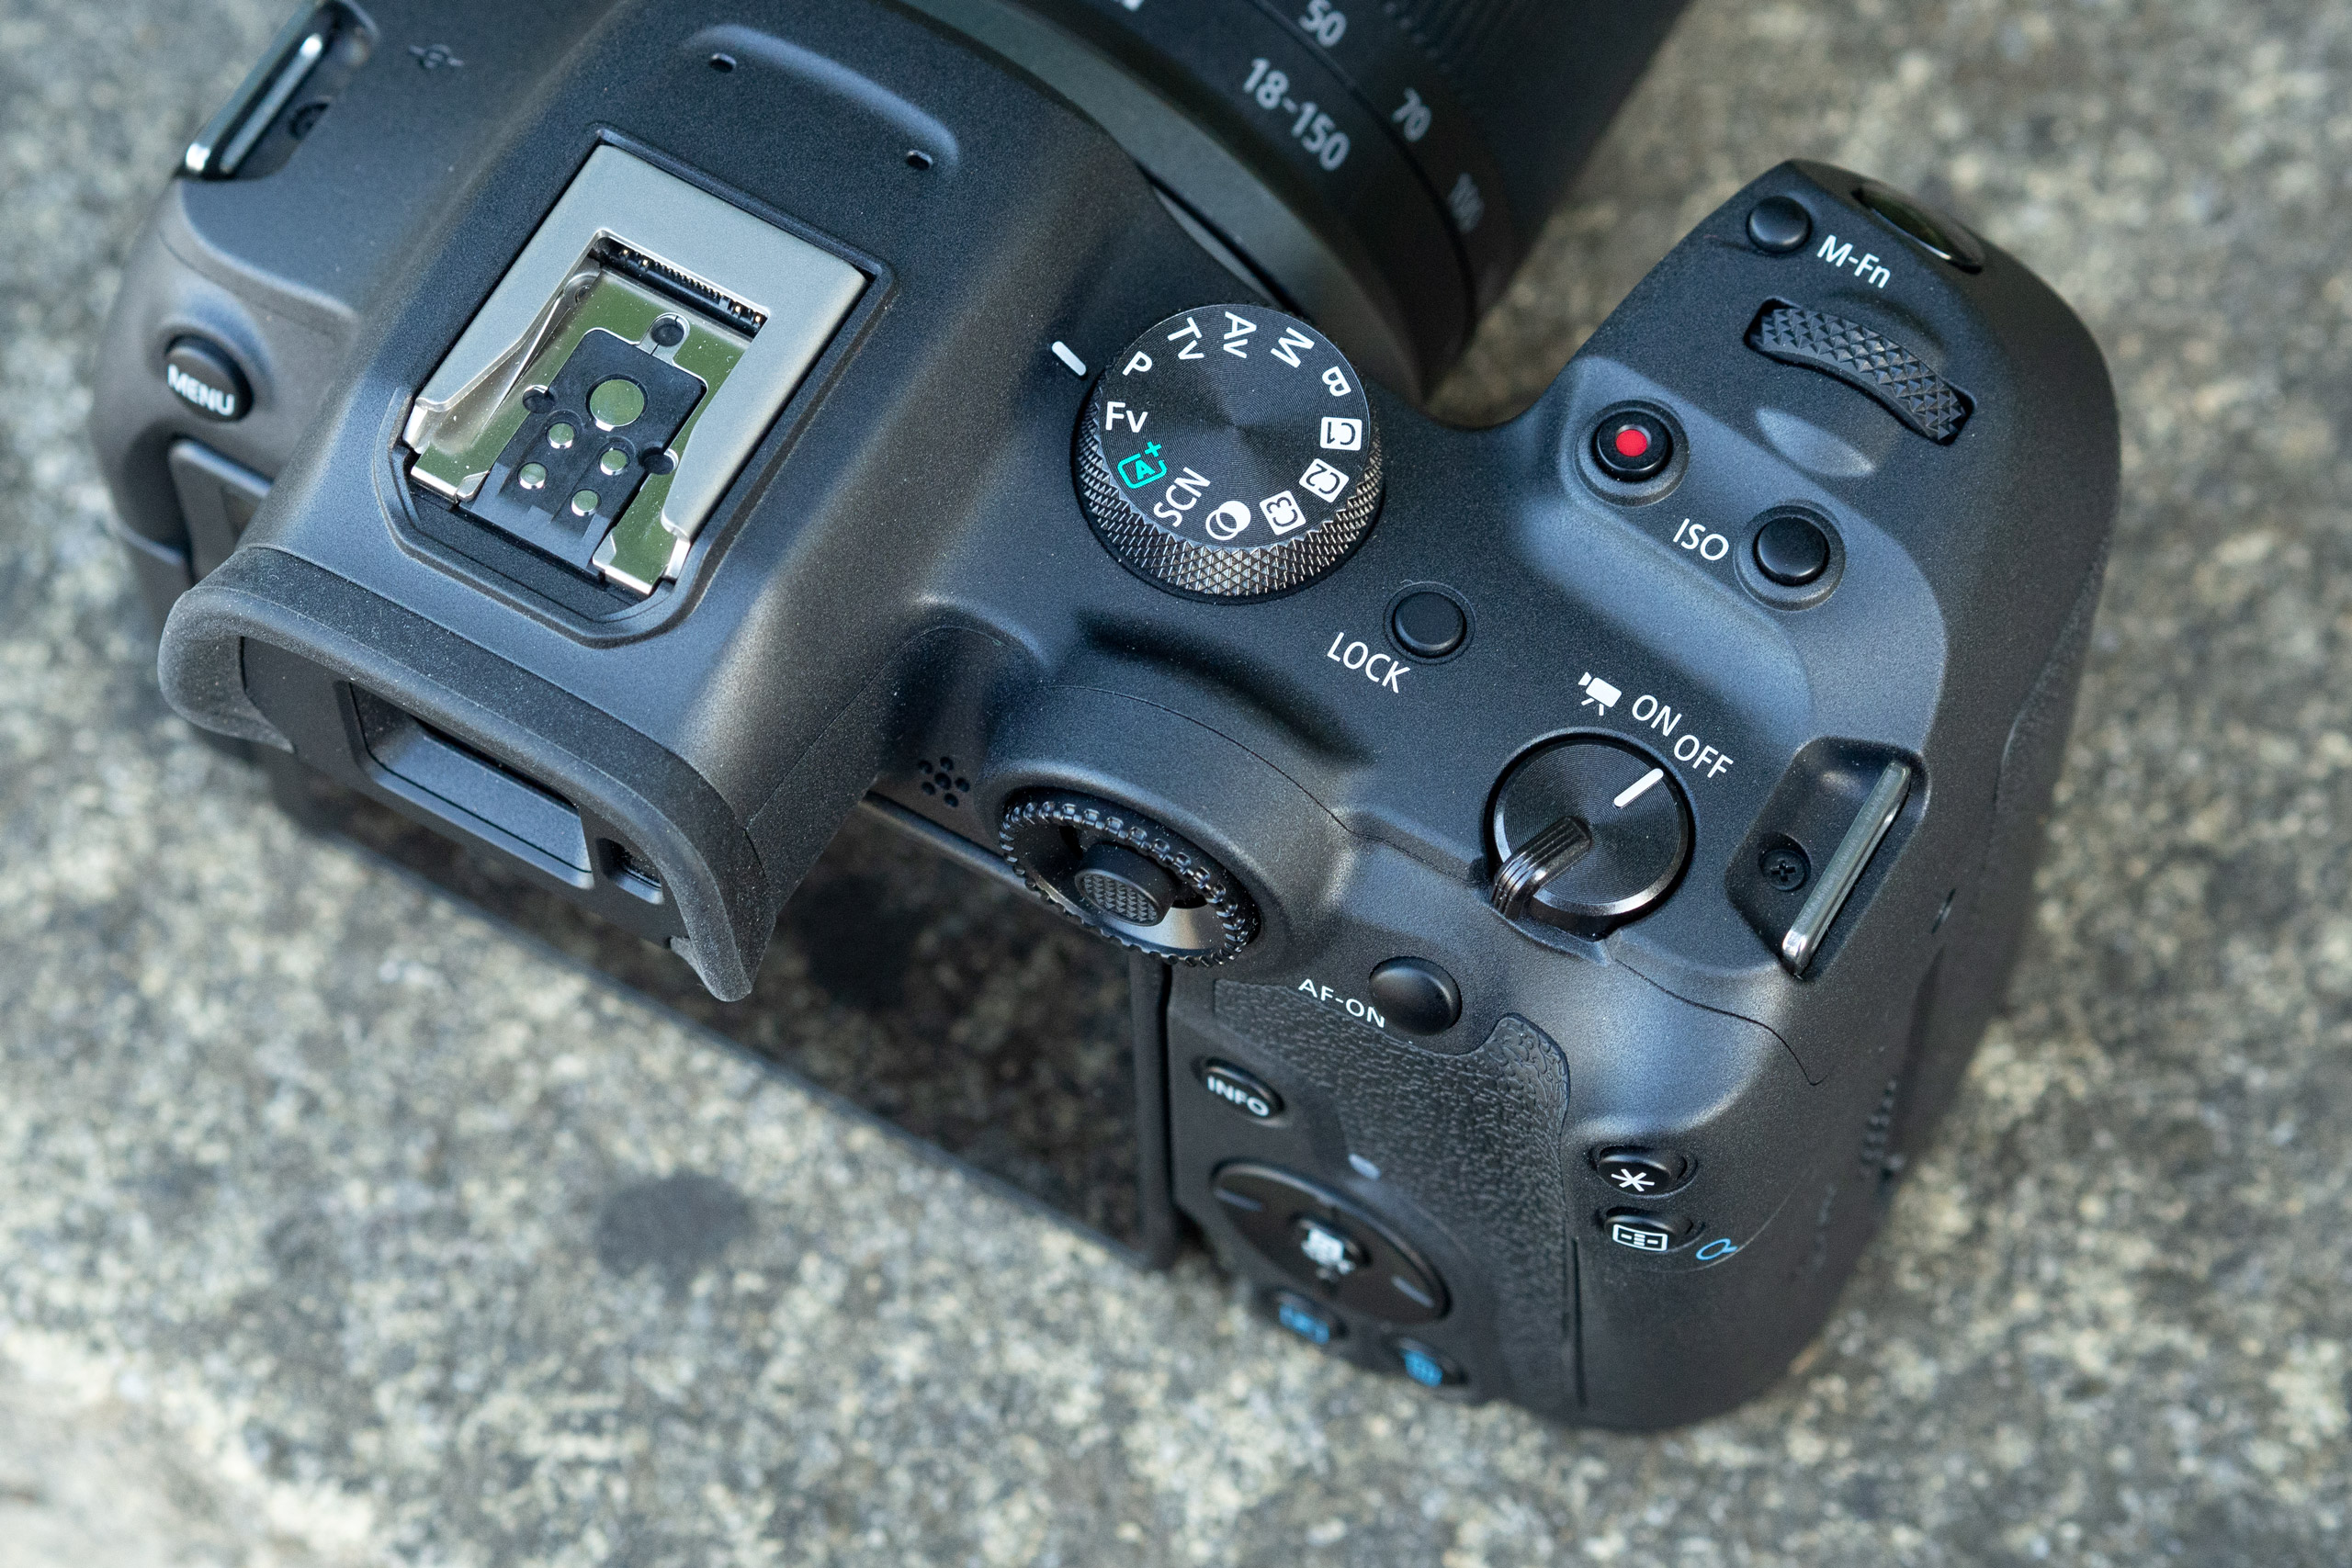 The top plate is relatively clean, with movie and ISO buttons placed behind the shutter release